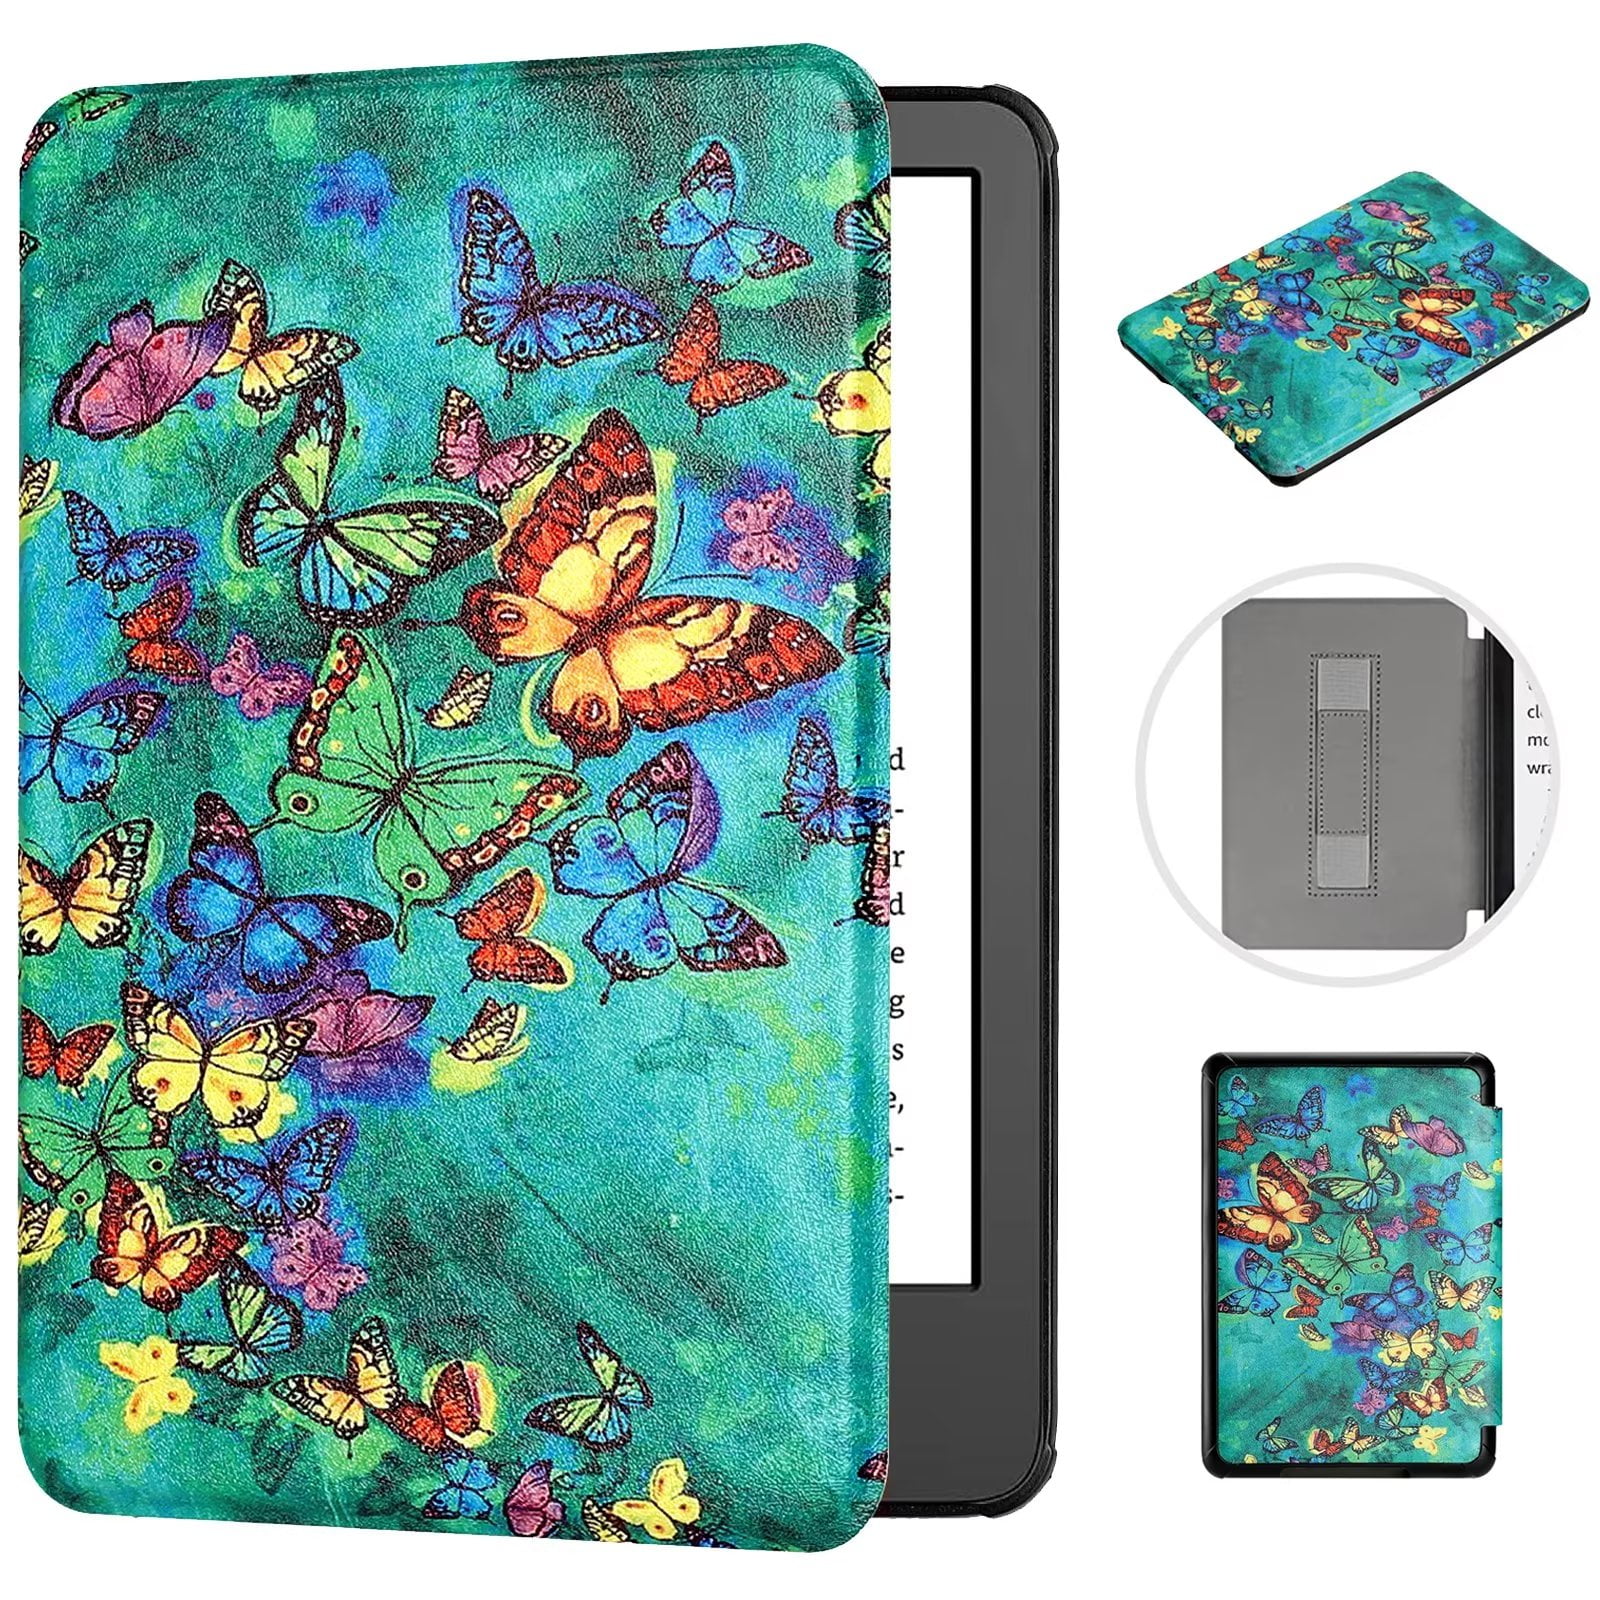 For All-new Kindle 2022 Release 11th Case For 6inch Kindle 11th Generation  C2V2L3 Fashion E-book Funda Cover